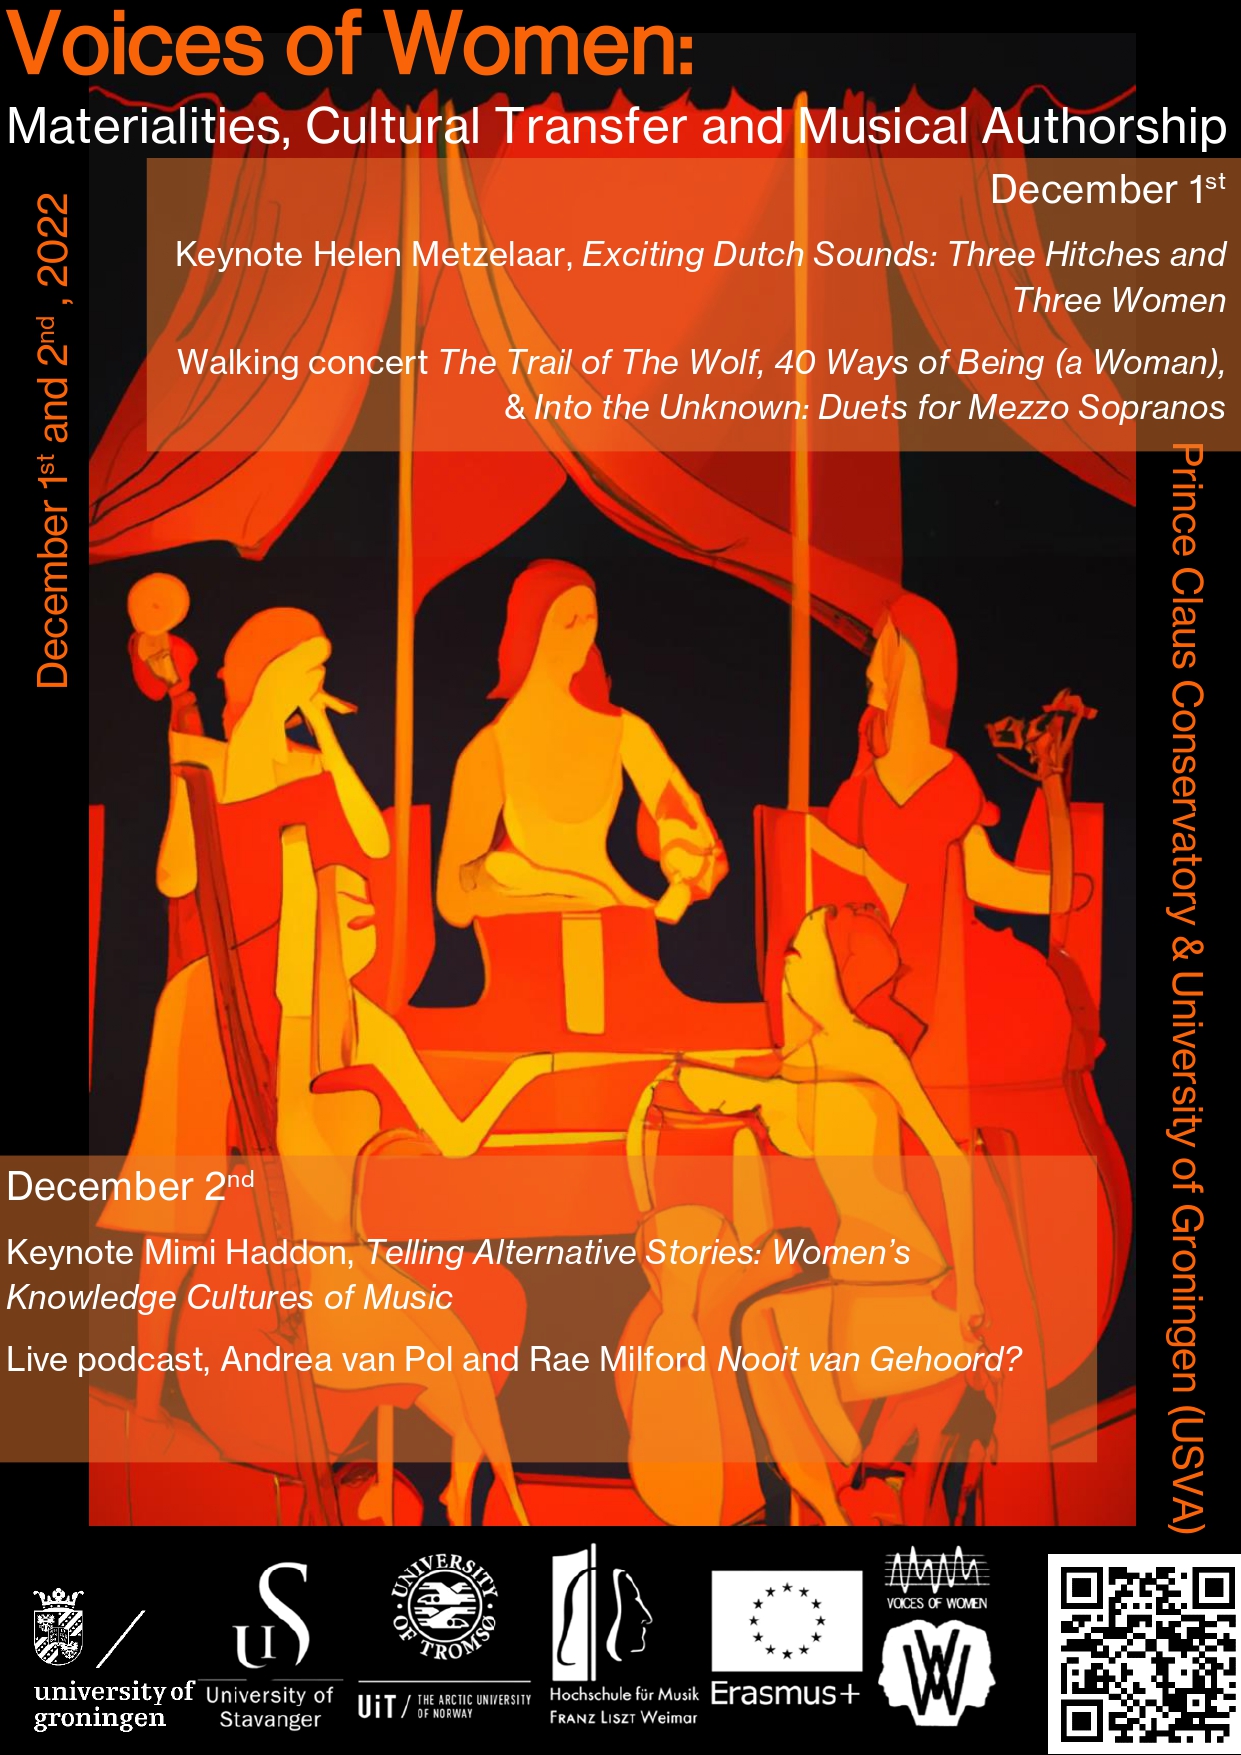 Programme overview over an orange-hued drawing of 5 women musicians.